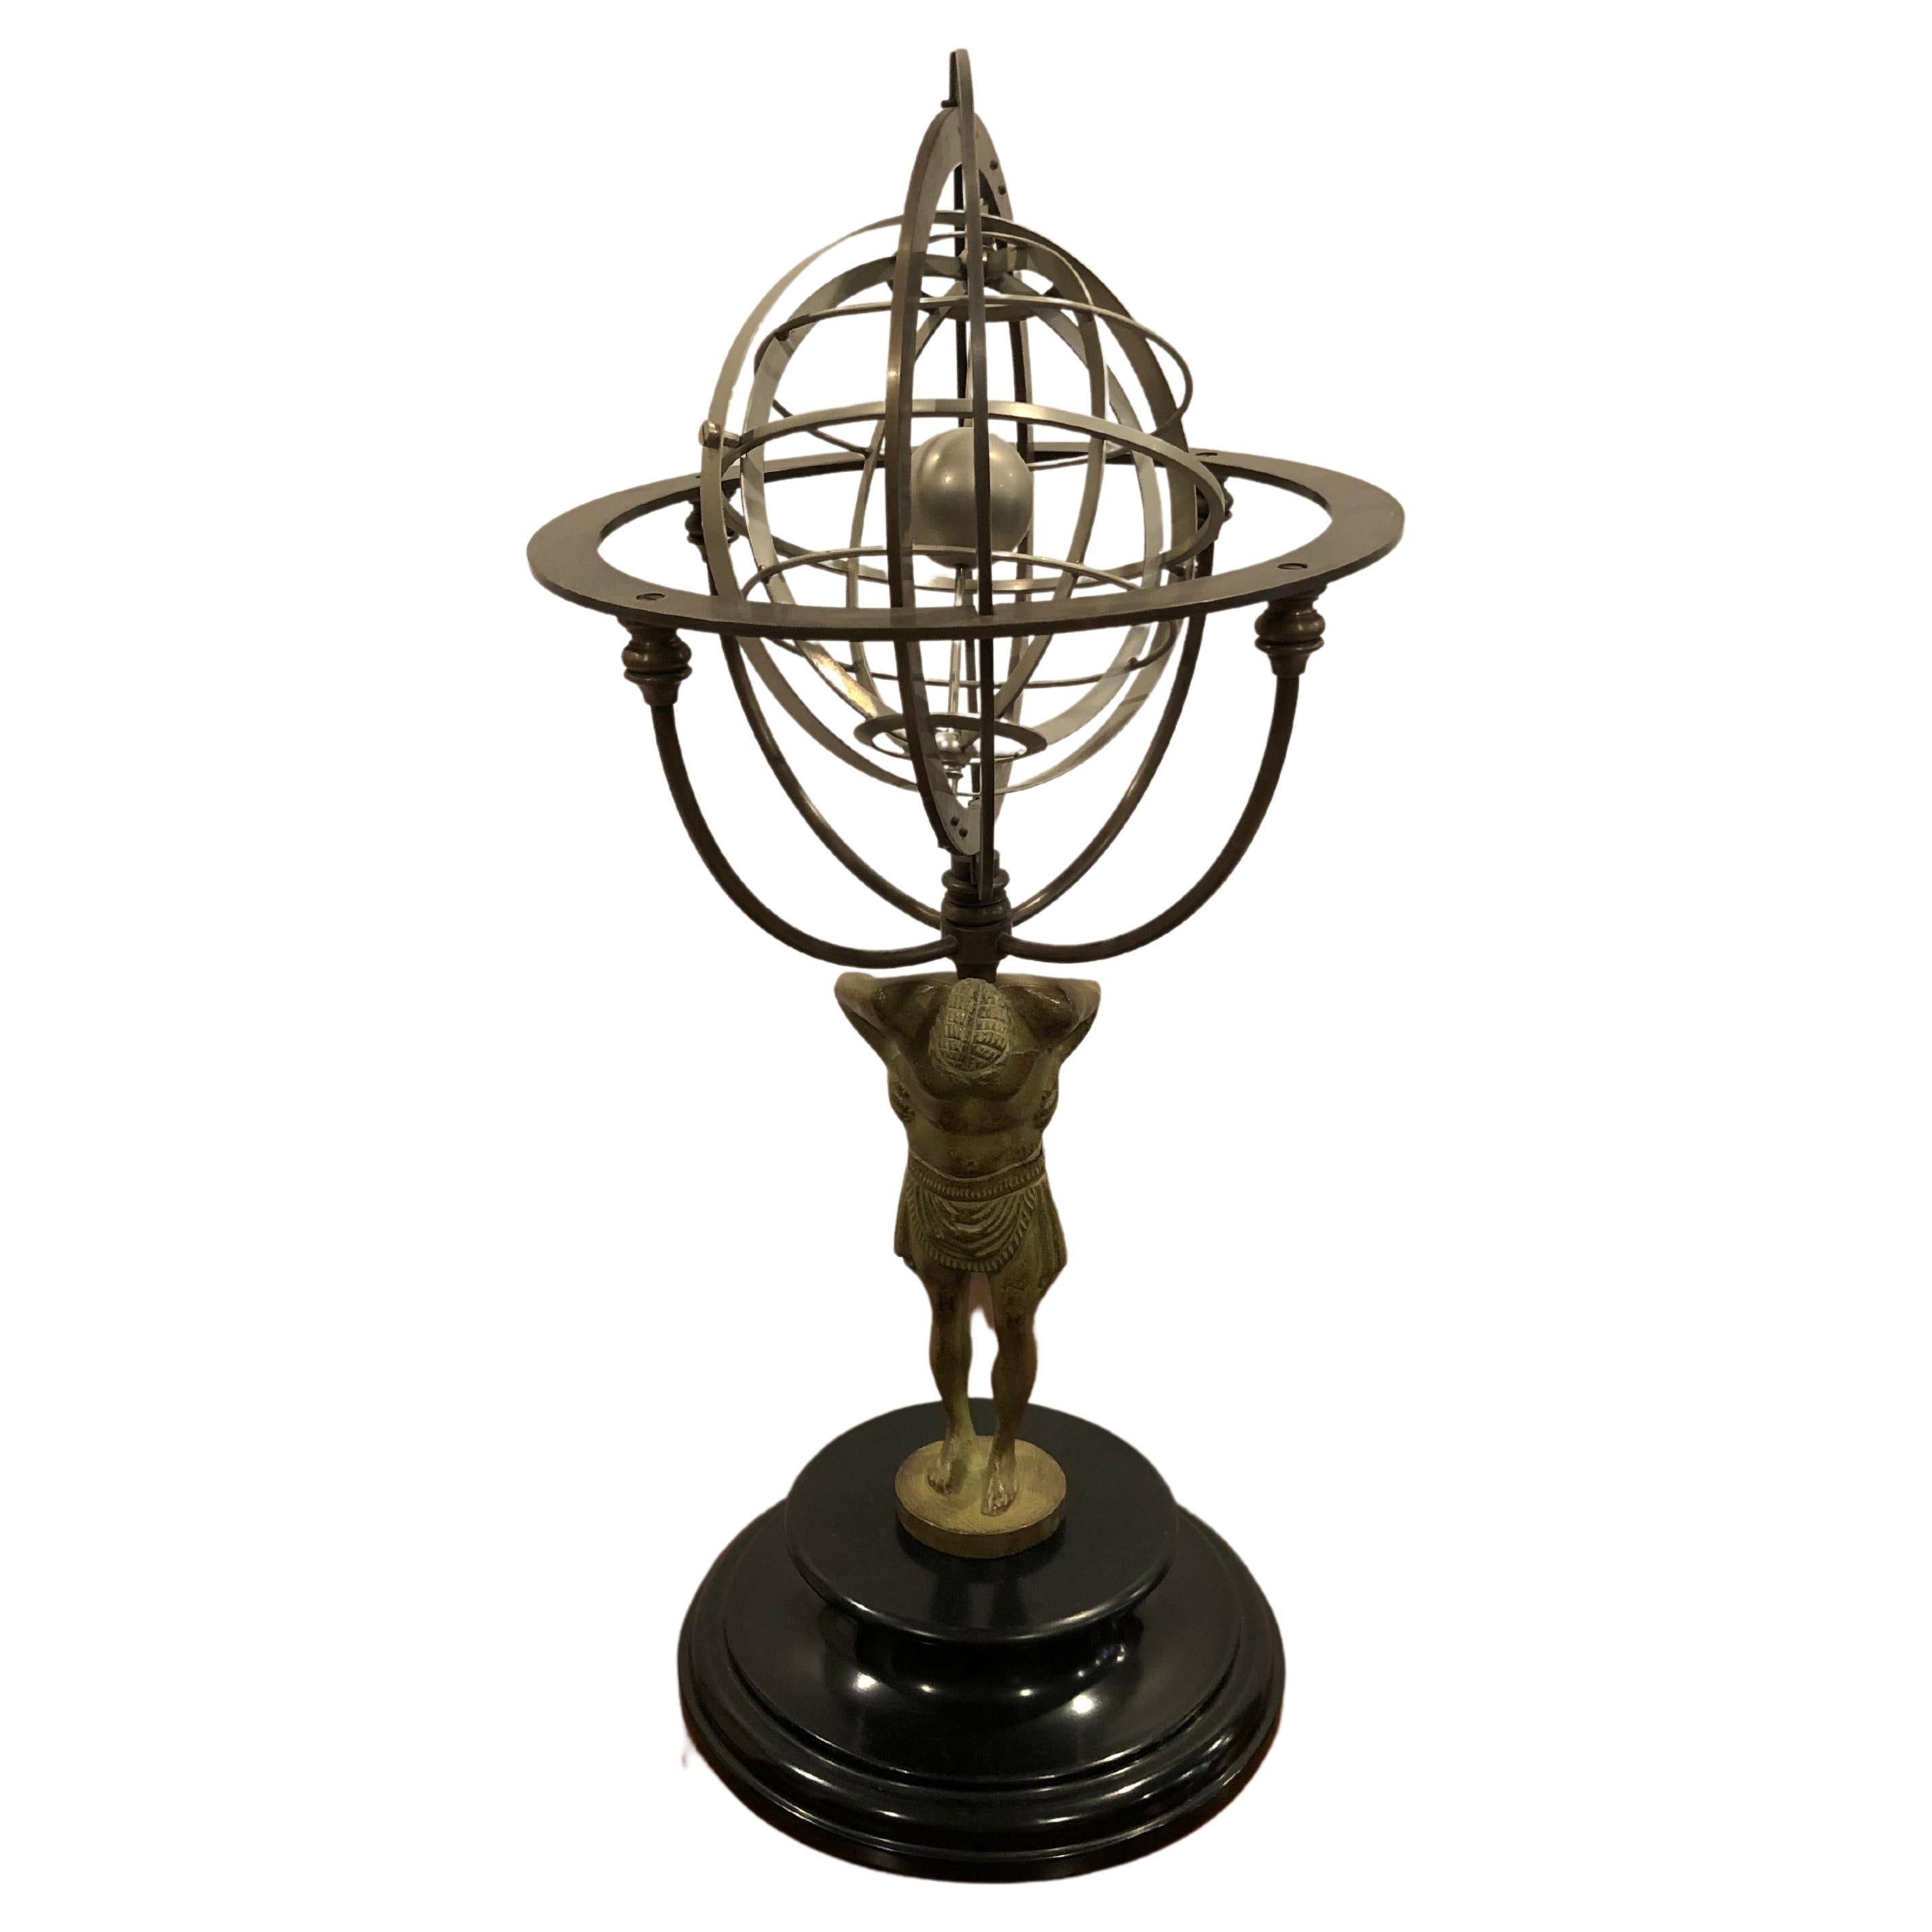 Impressive Metal Armillary Sculpture with Man and Globe on Shoulders